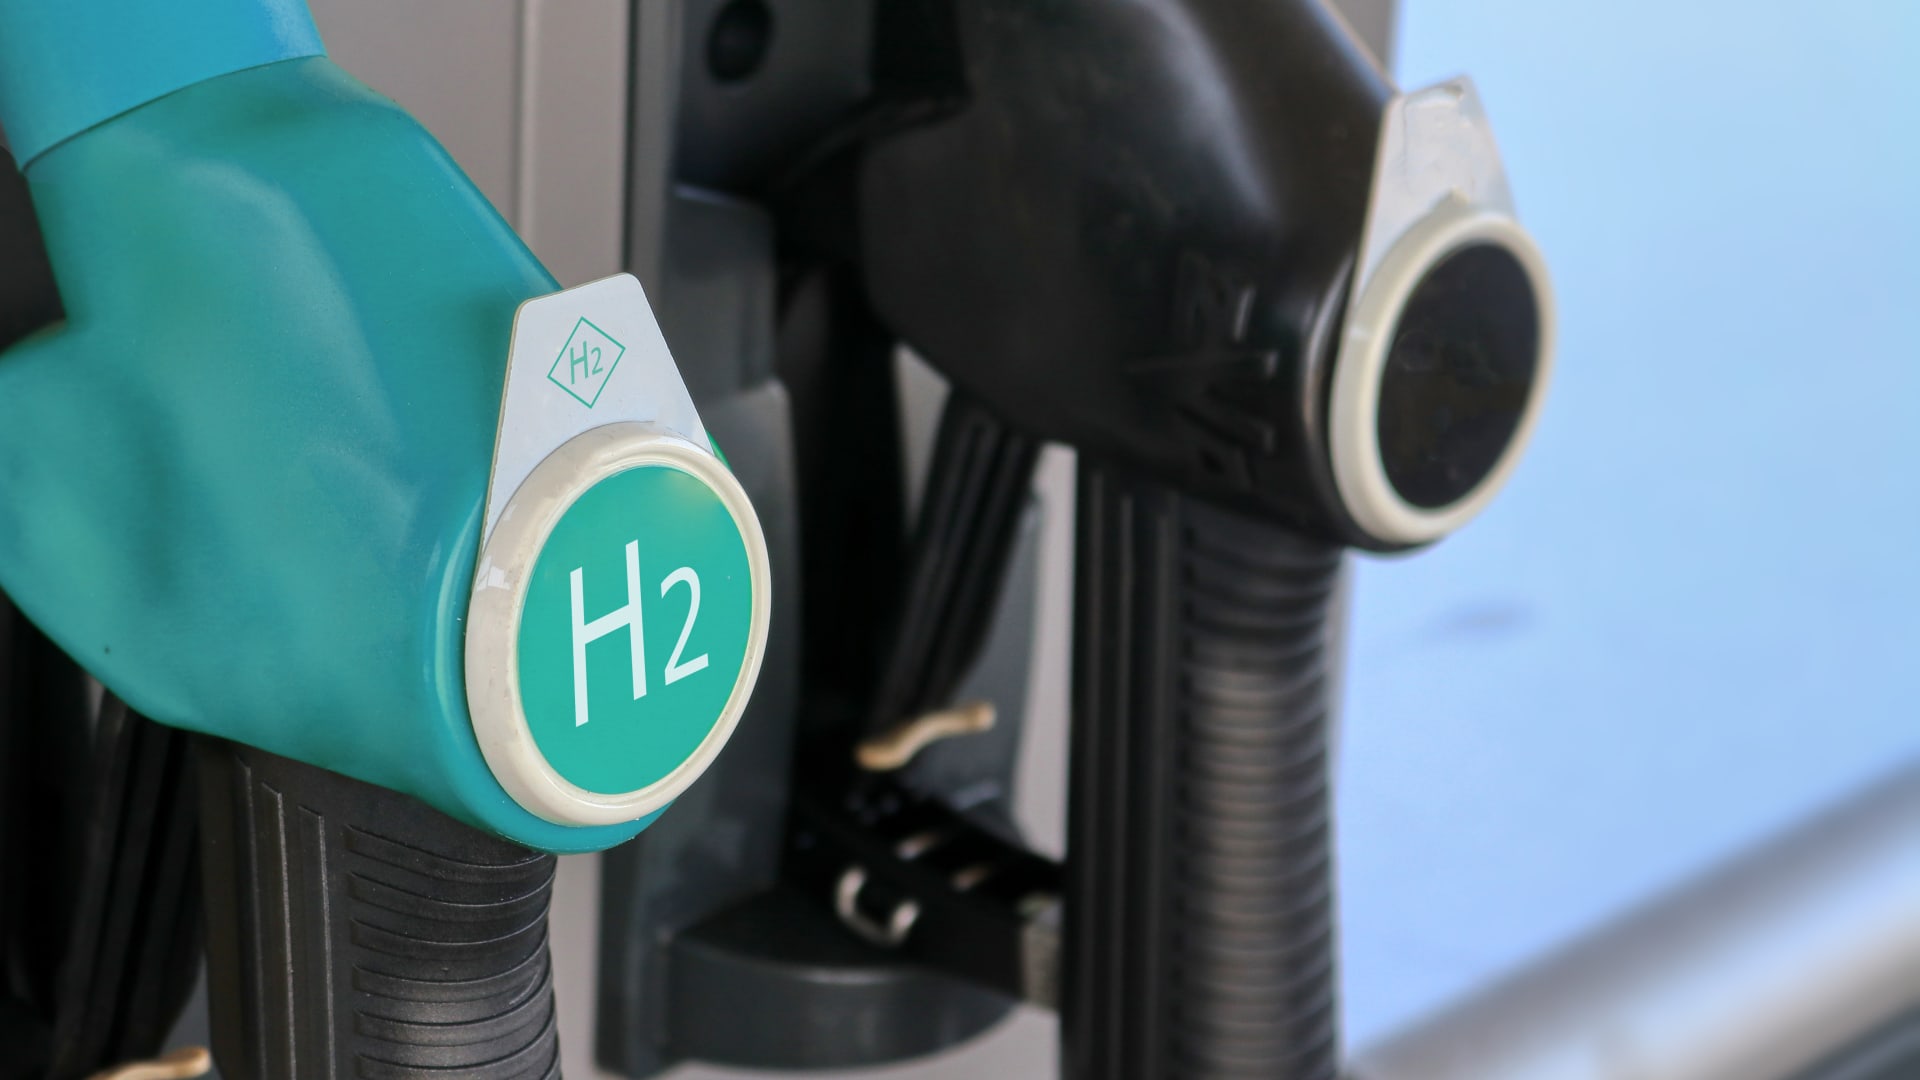 Bernstein has named its top stock picks as green hydrogen becomes more attractive